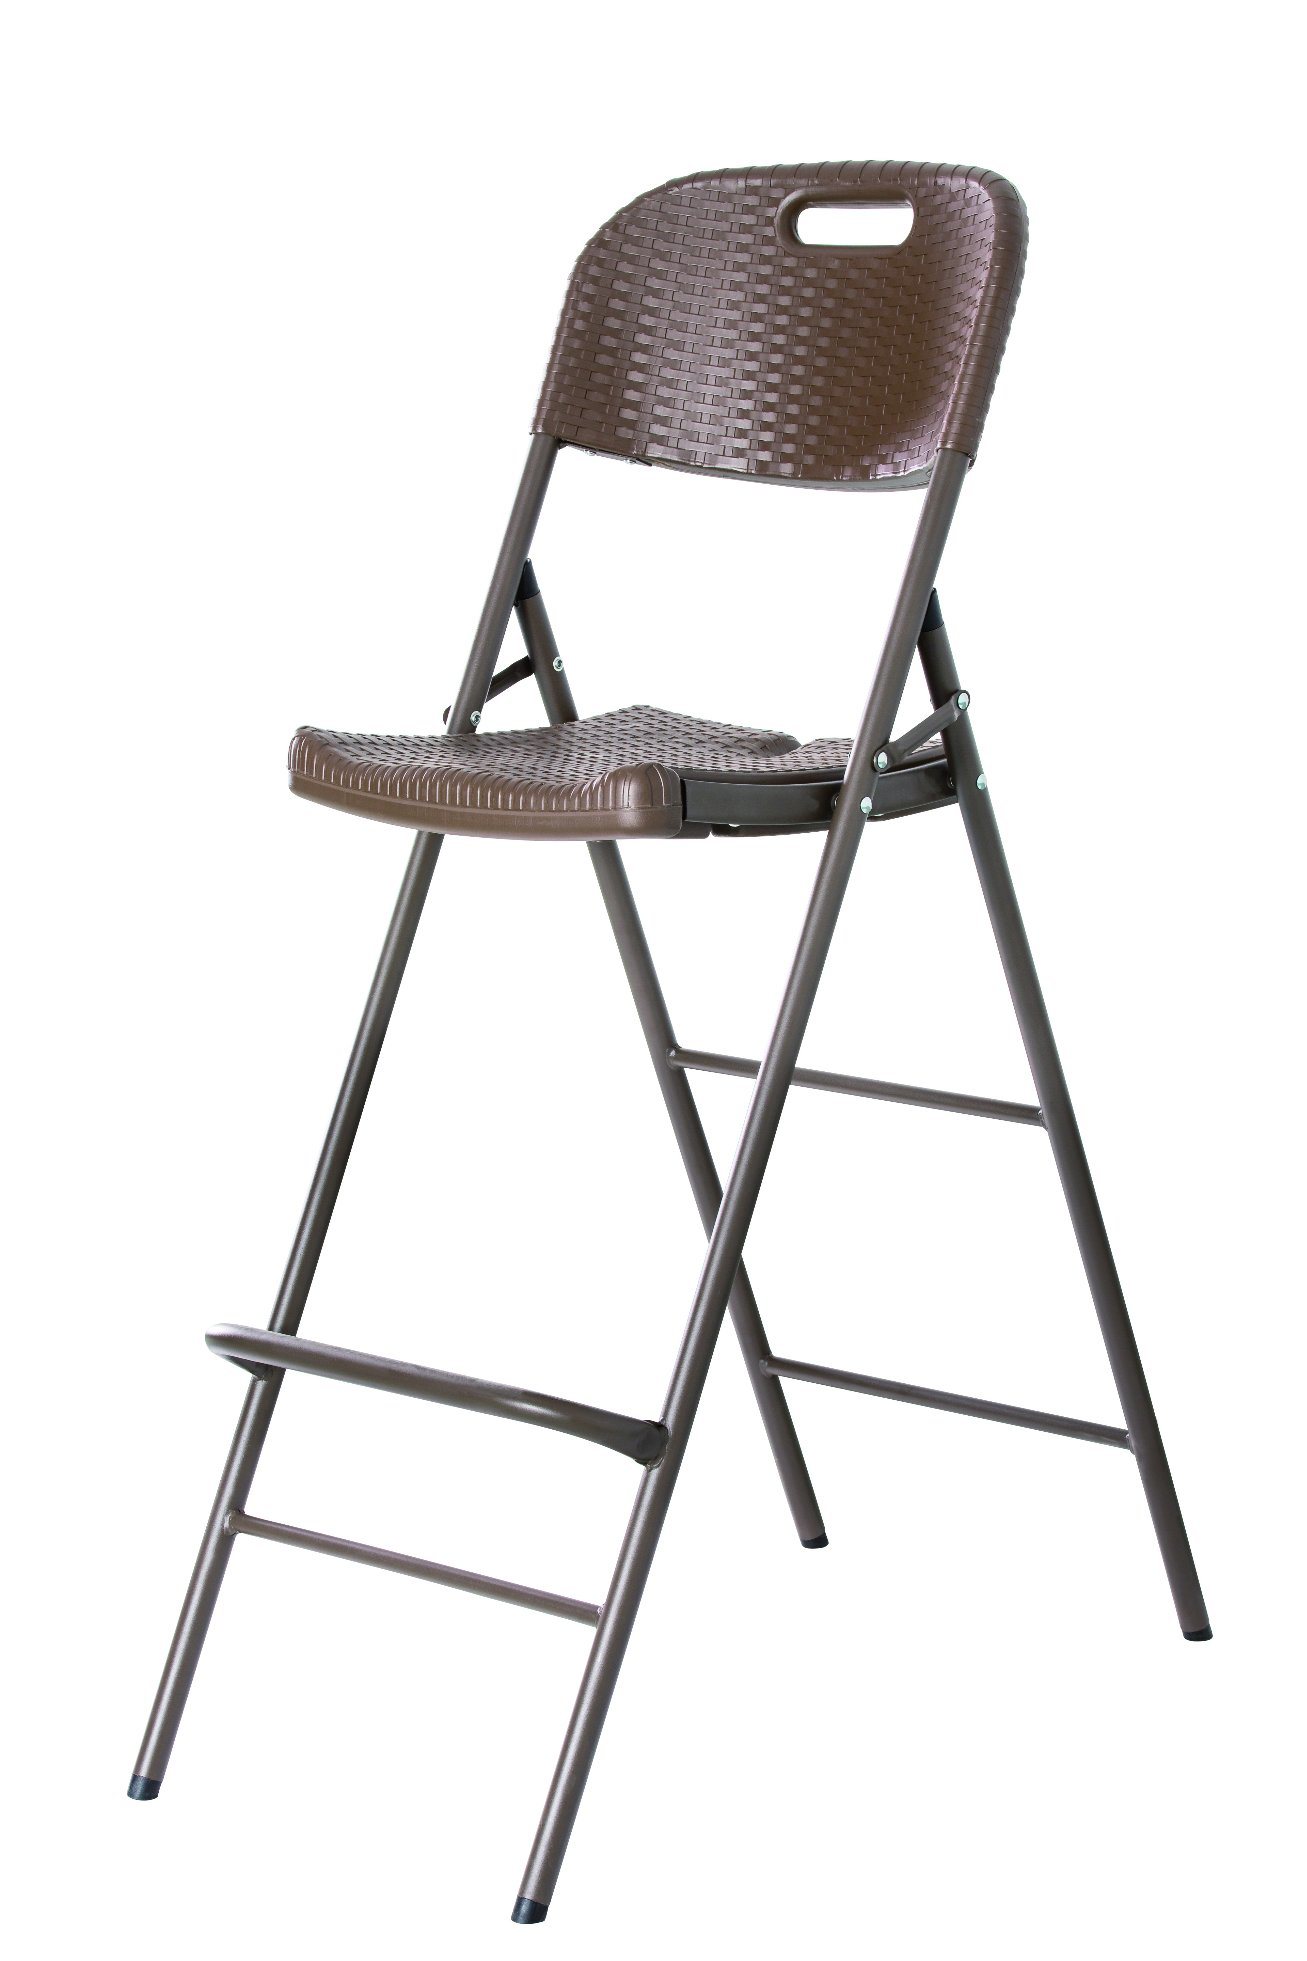 Imitated Rattan Finished Plastic Folding Bar Chair for Cocktail Table Used (CG-RHY53)